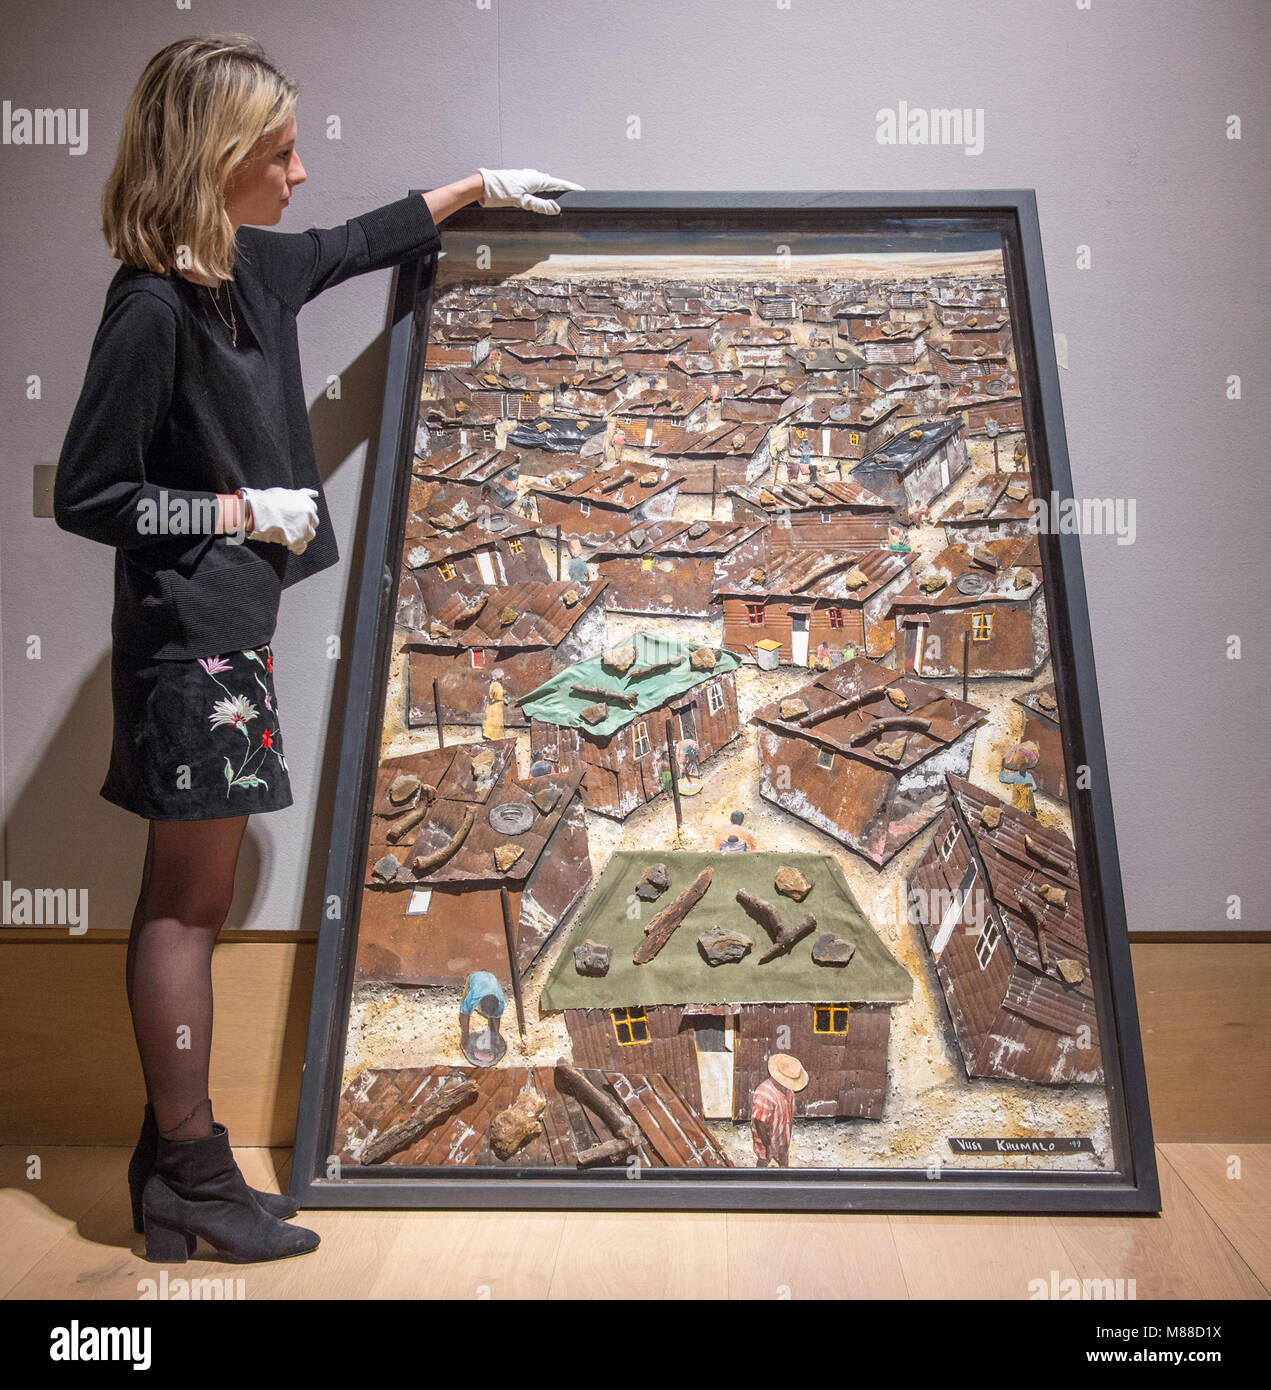 Bonhams, New Bond Street, London, UK. 16 March 2018. Sonnabo Infernal Settlement by Vusi Khumalo being hung for The South African Art Sale. It is estimated at £3,000-5,000. Credit: Malcolm Park/Alamy Live News. Stock Photo